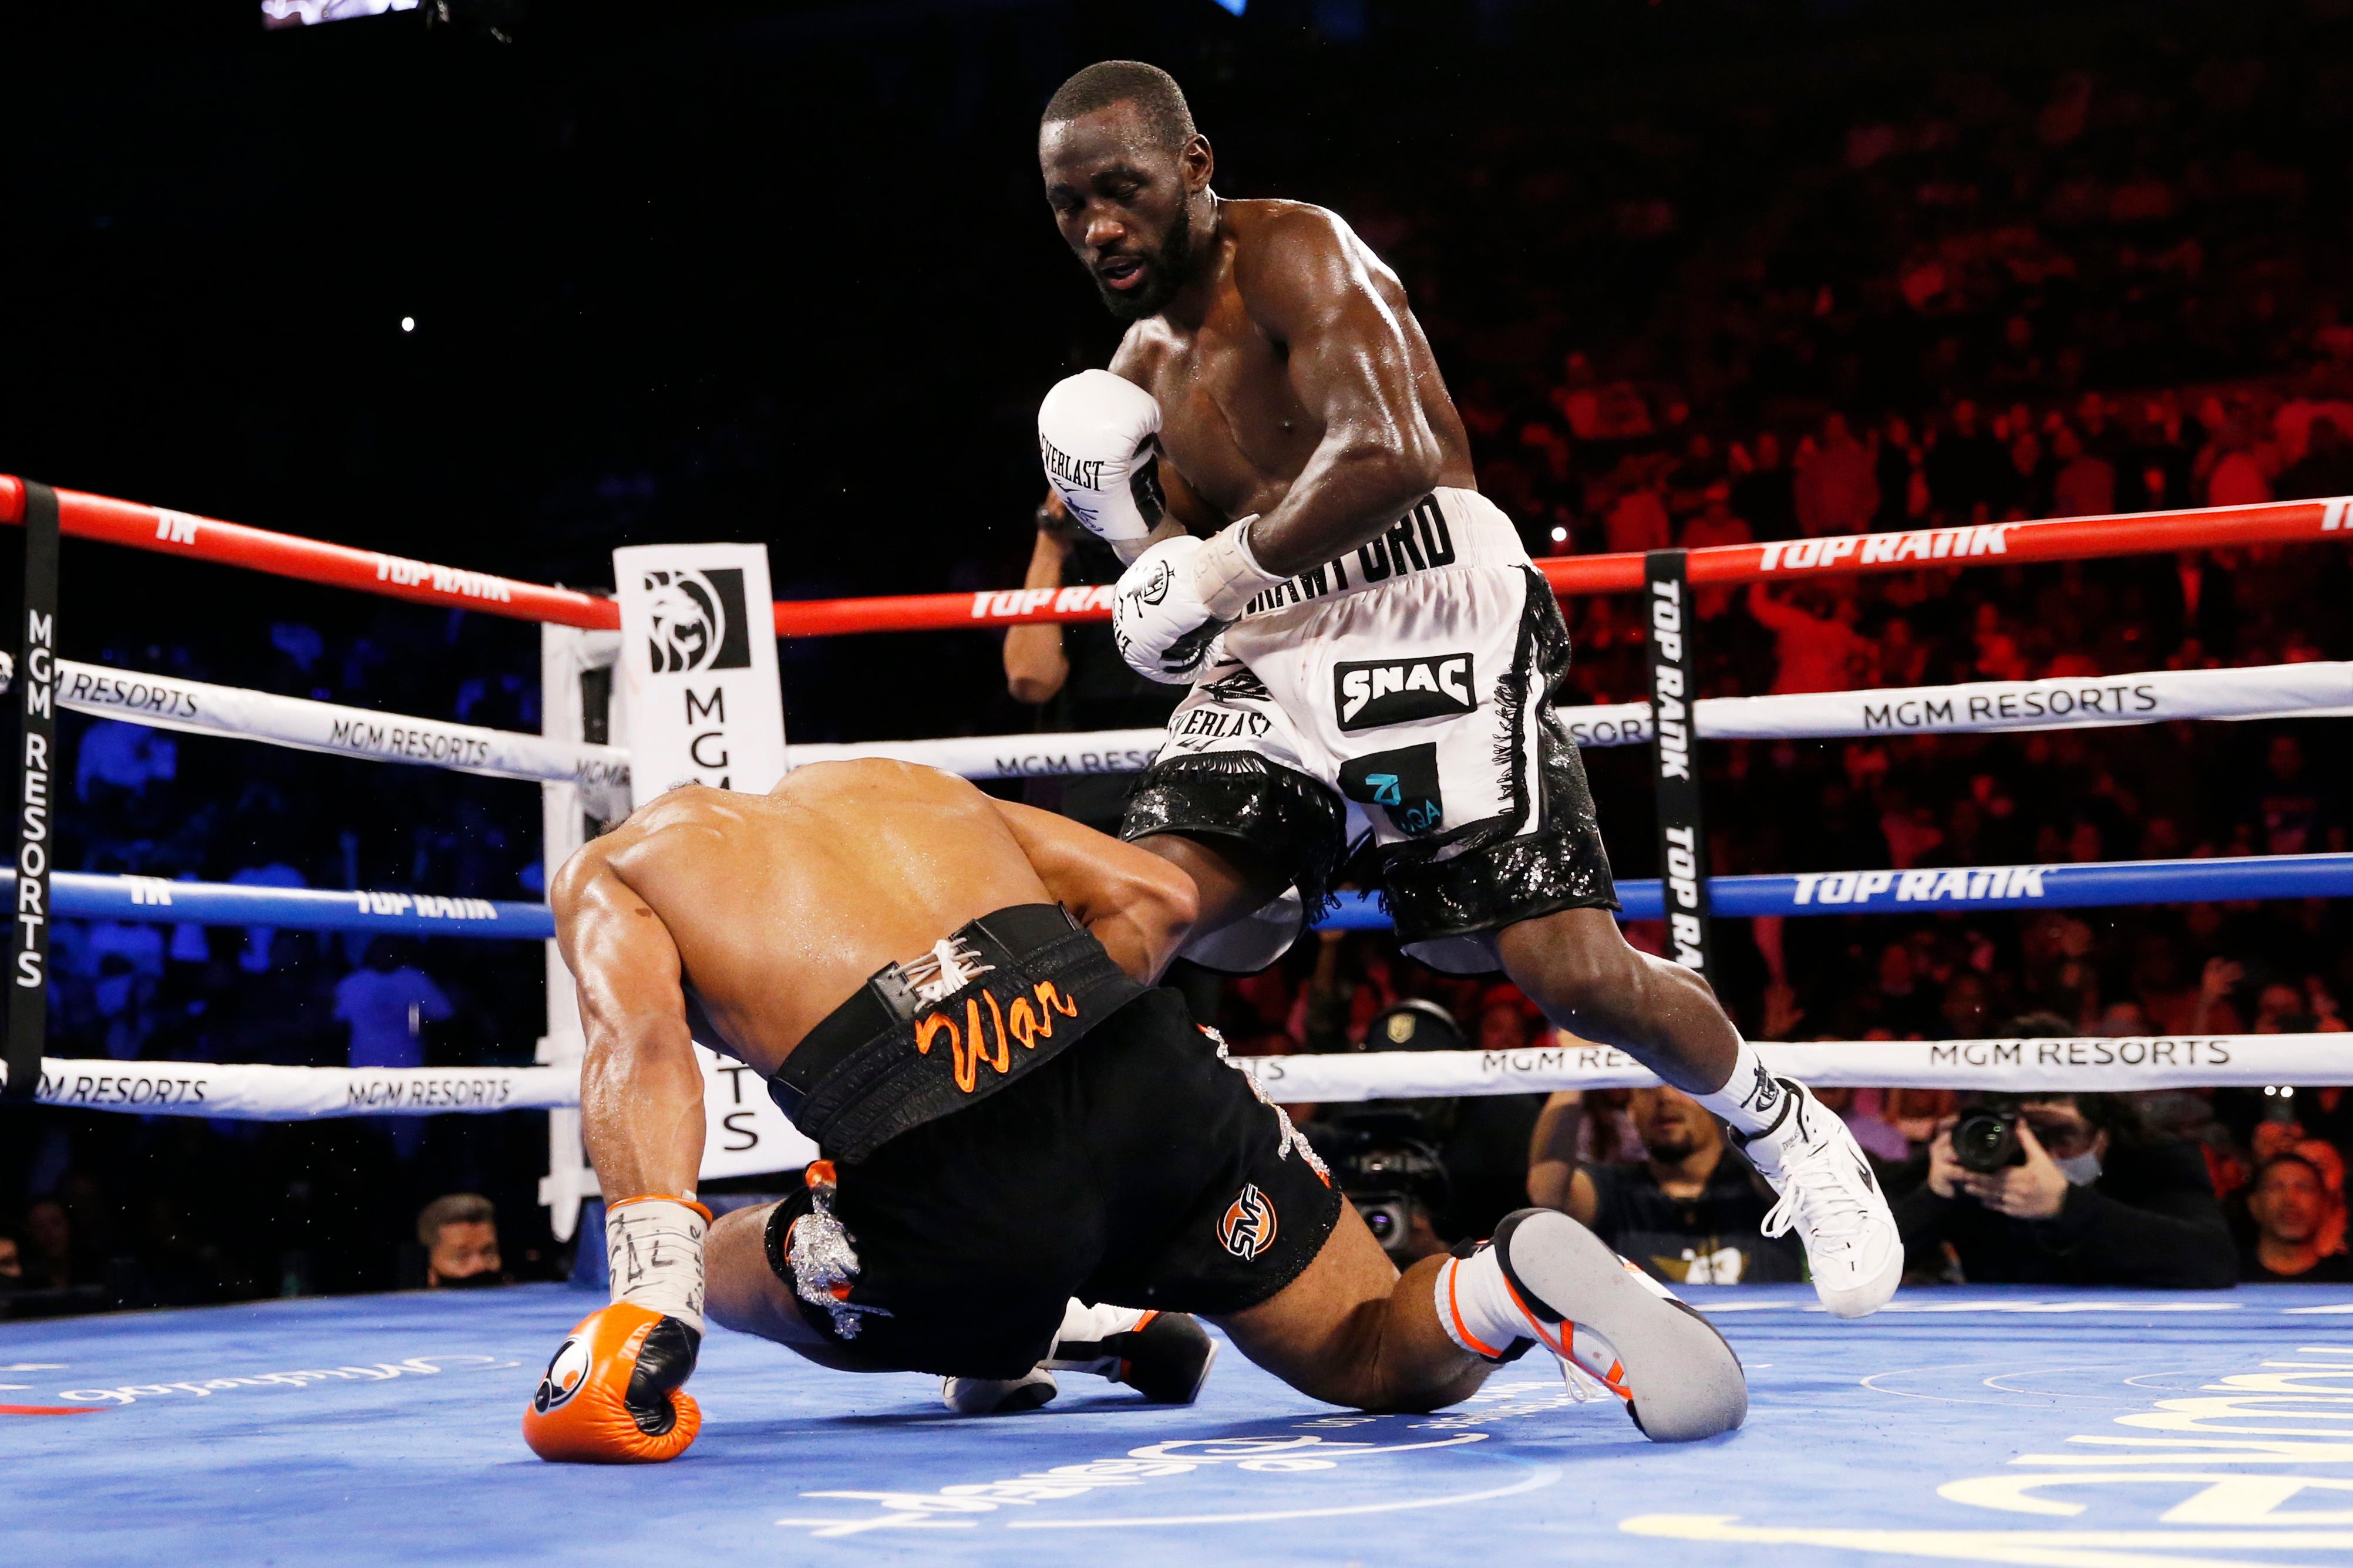 Terence Crawford stopped Shawn Porter to retain his world title